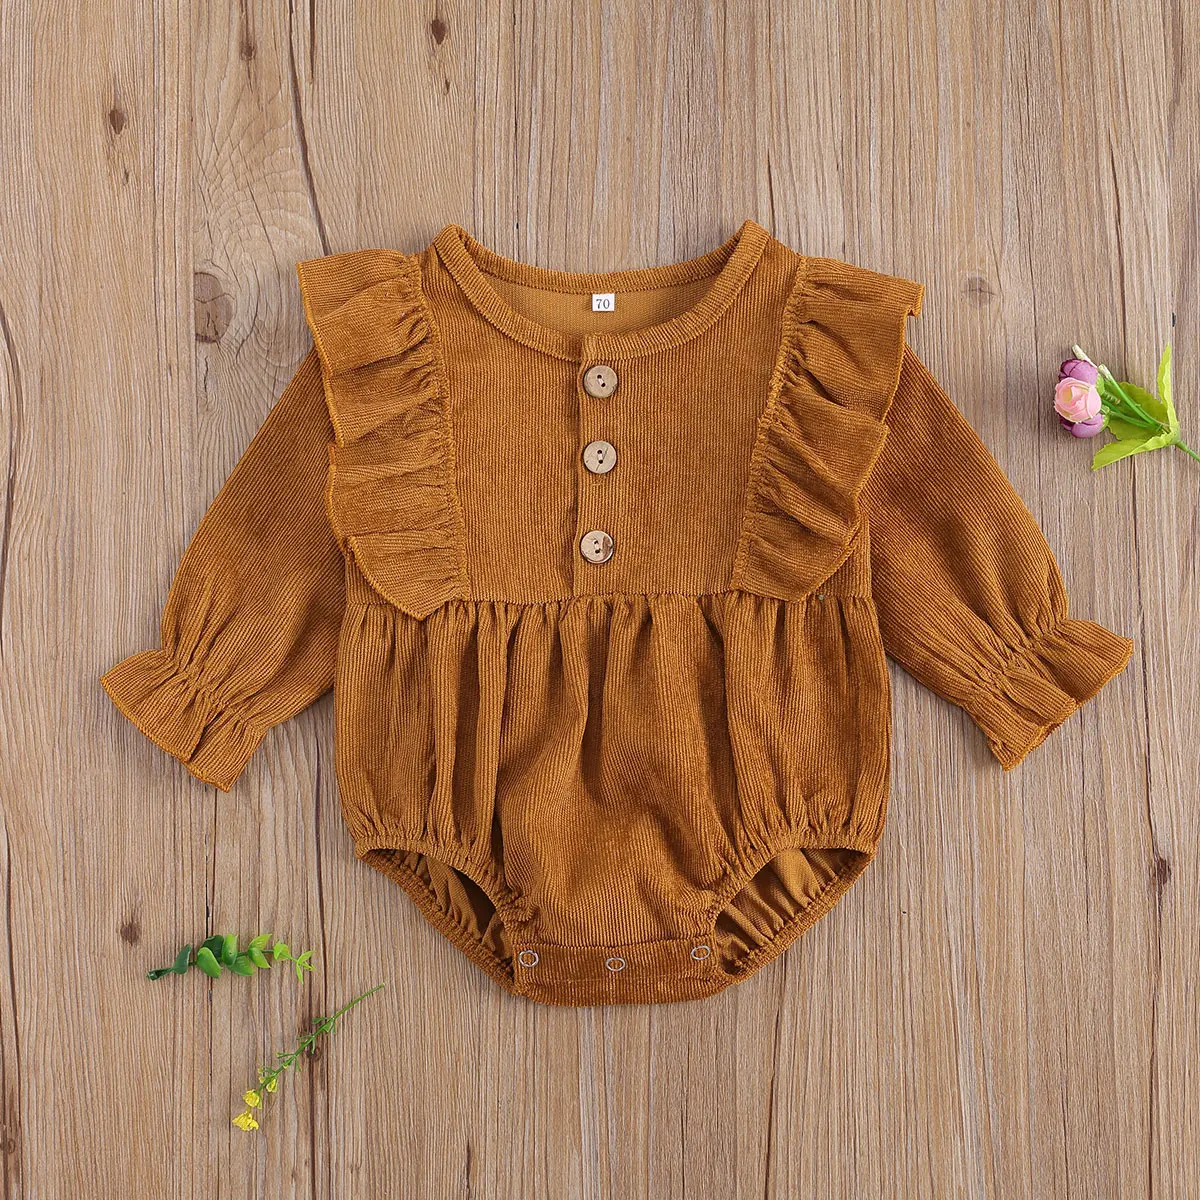 Infant Baby Girl Corduroy Romper Newborn Baby Girl Solid Causal Long Sleeve Jumpsuit With Button Closure Spring Autumn Clothing